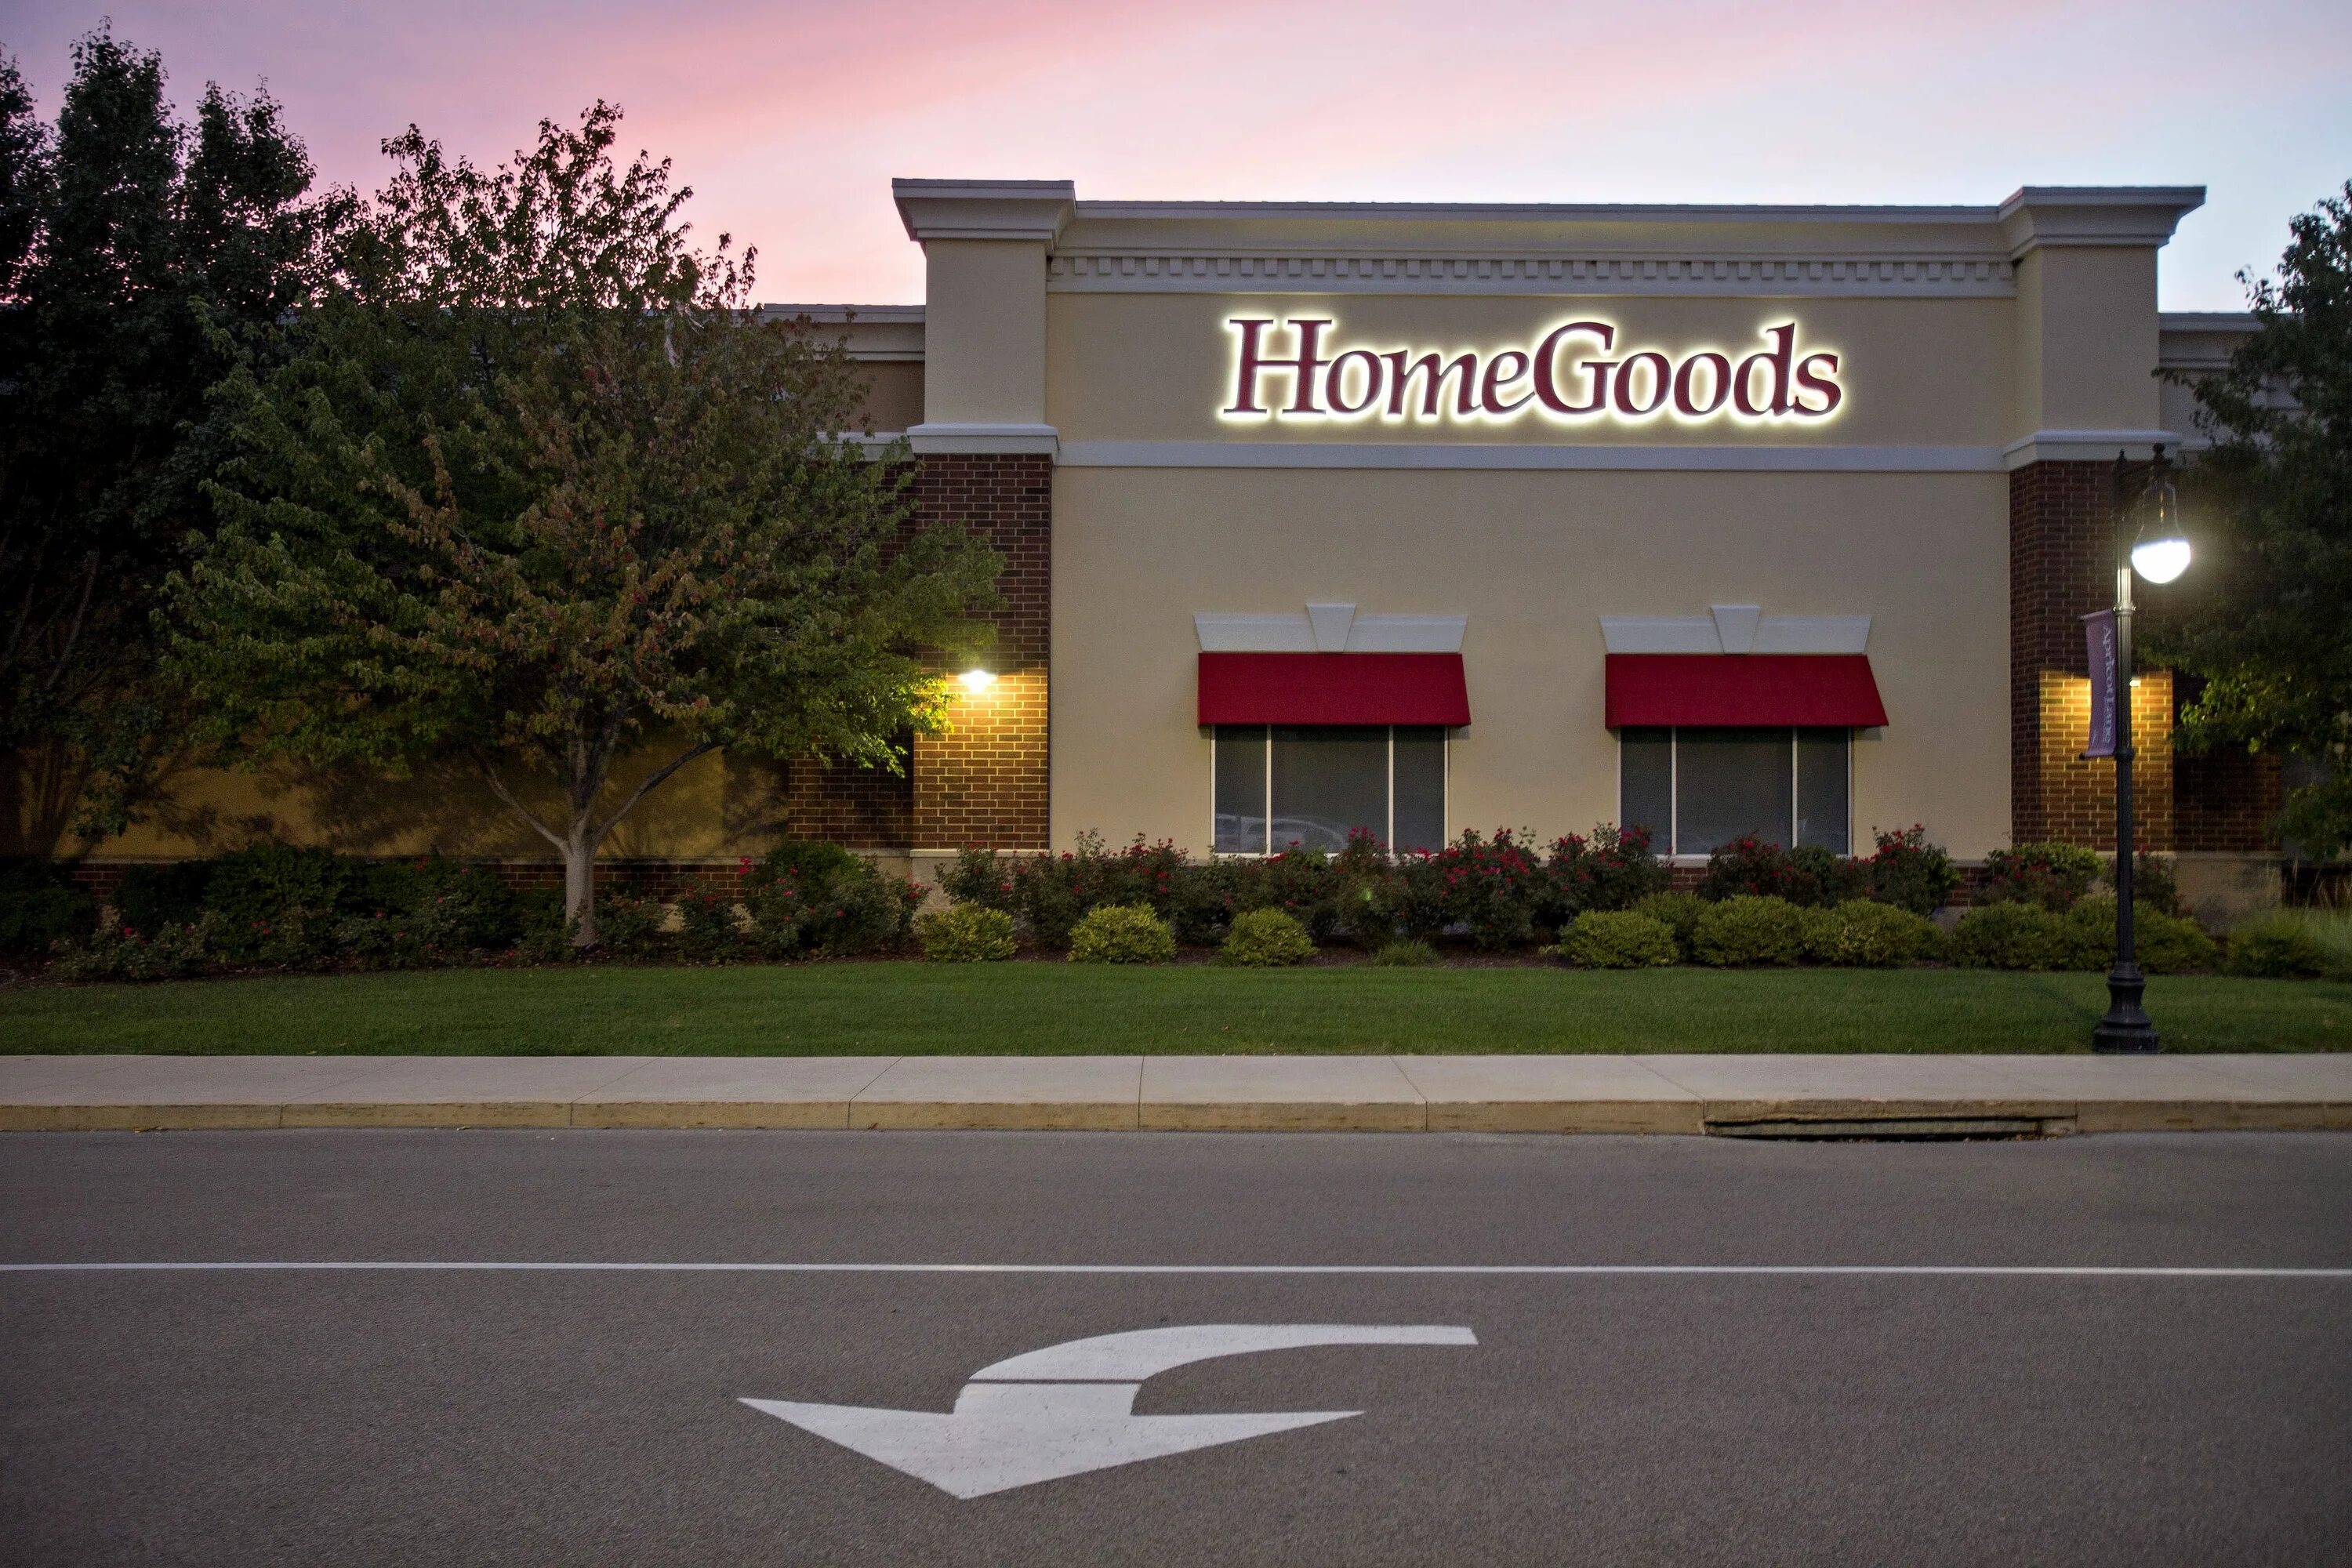 Like home and good. Home goods. Home goods Store. Good Home shop. Home goods фото.